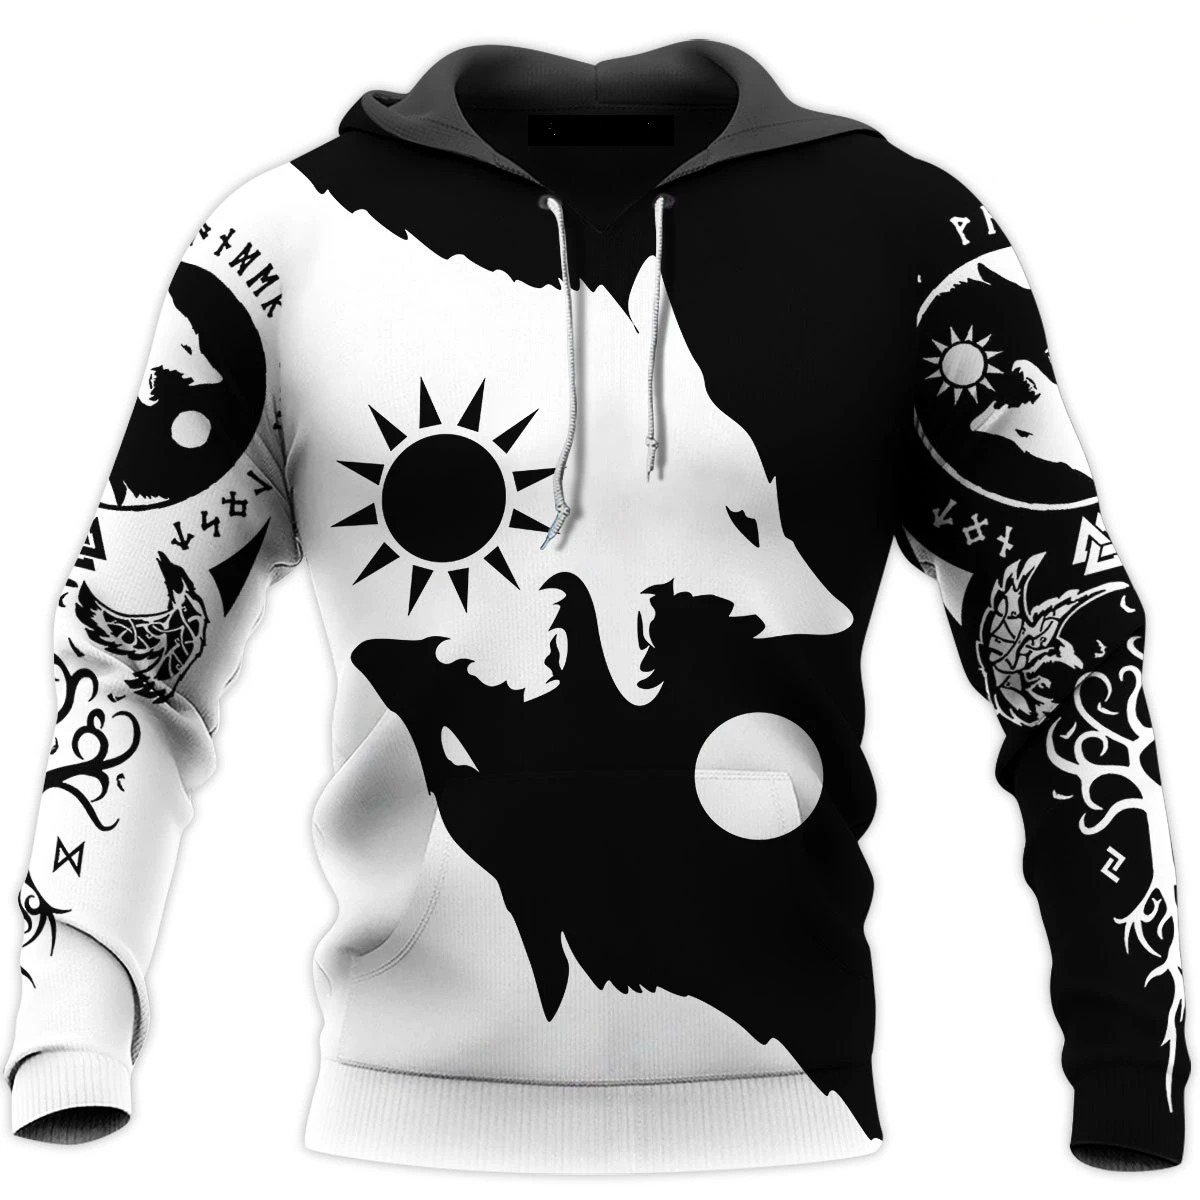 Skoll and Hati 3D All Over Printed hoodie, shirt and tank top – Hothot 240320